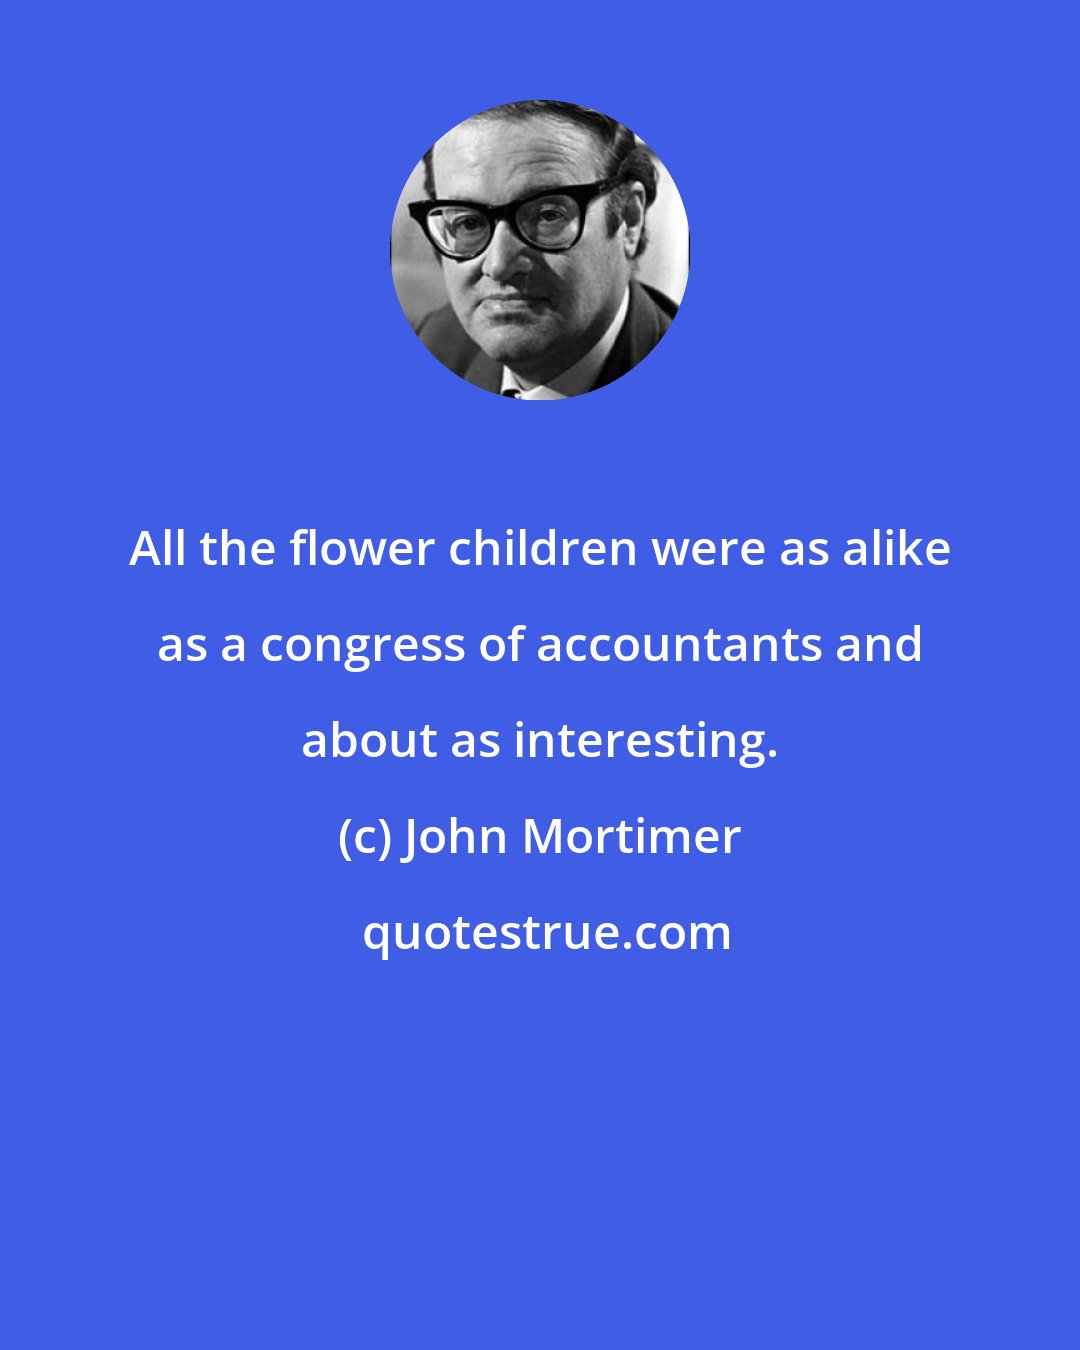 John Mortimer: All the flower children were as alike as a congress of accountants and about as interesting.